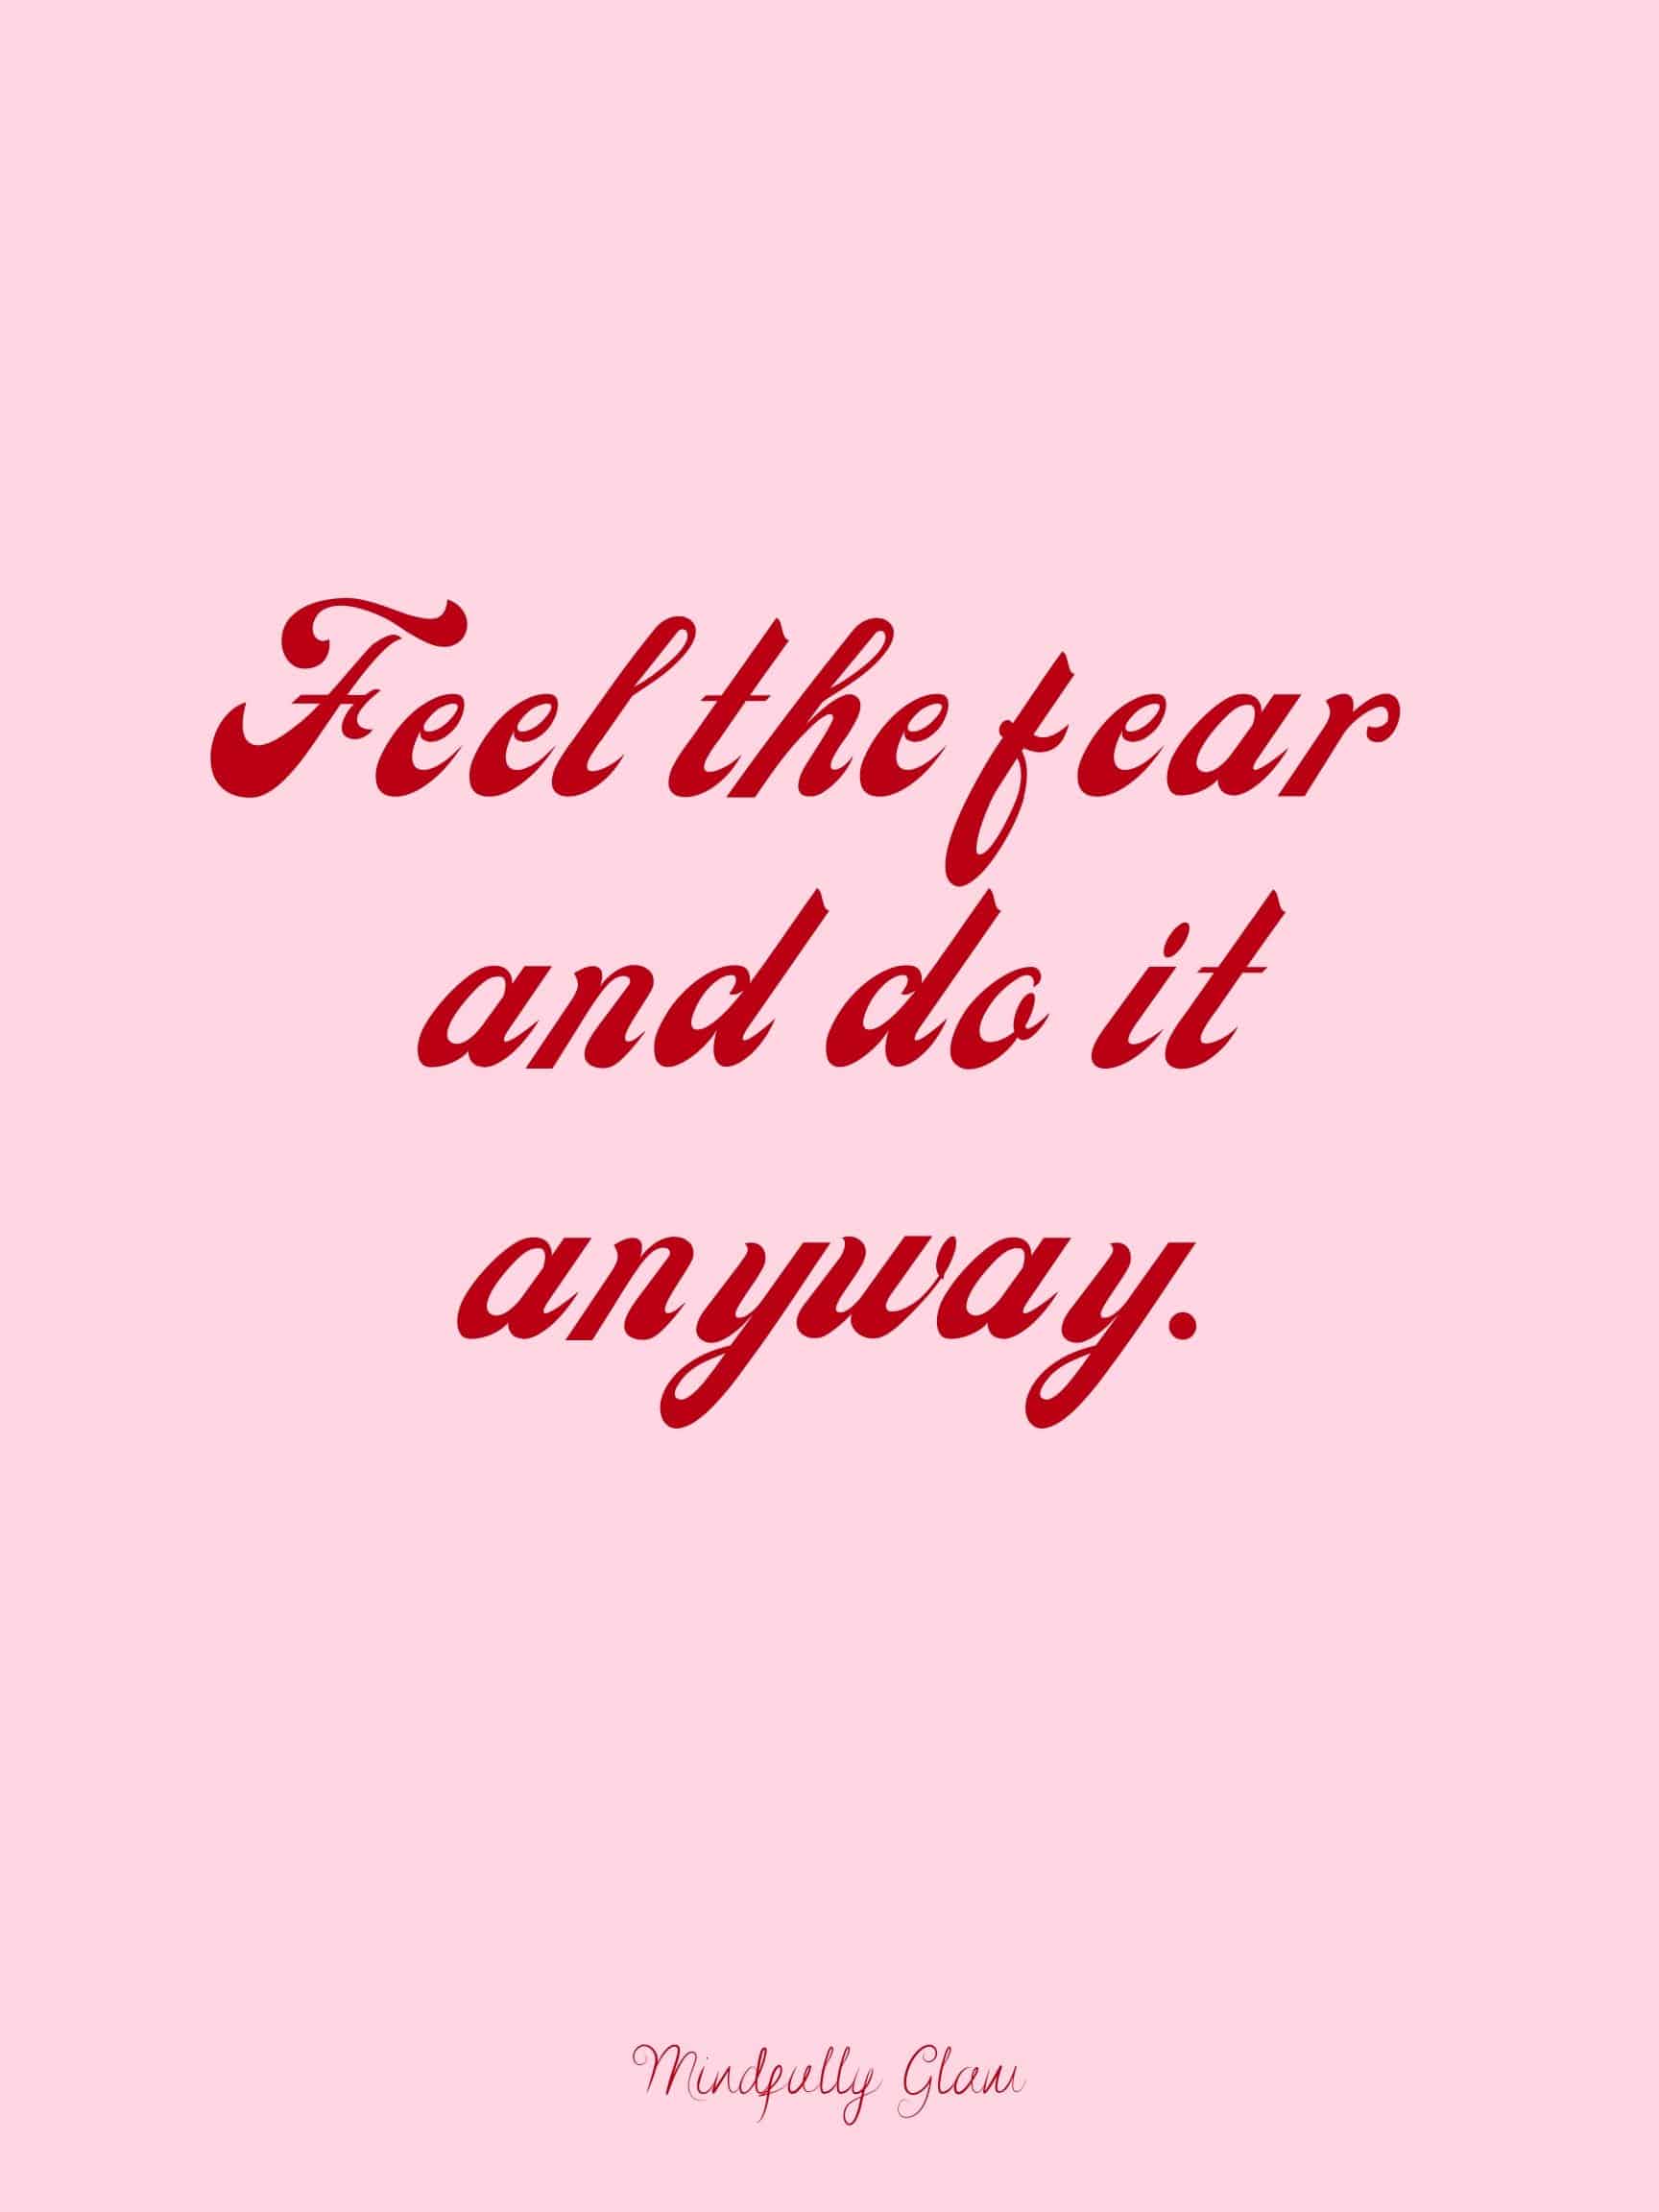 15 Inspiring and Motivational Quotes on Overcoming Fear